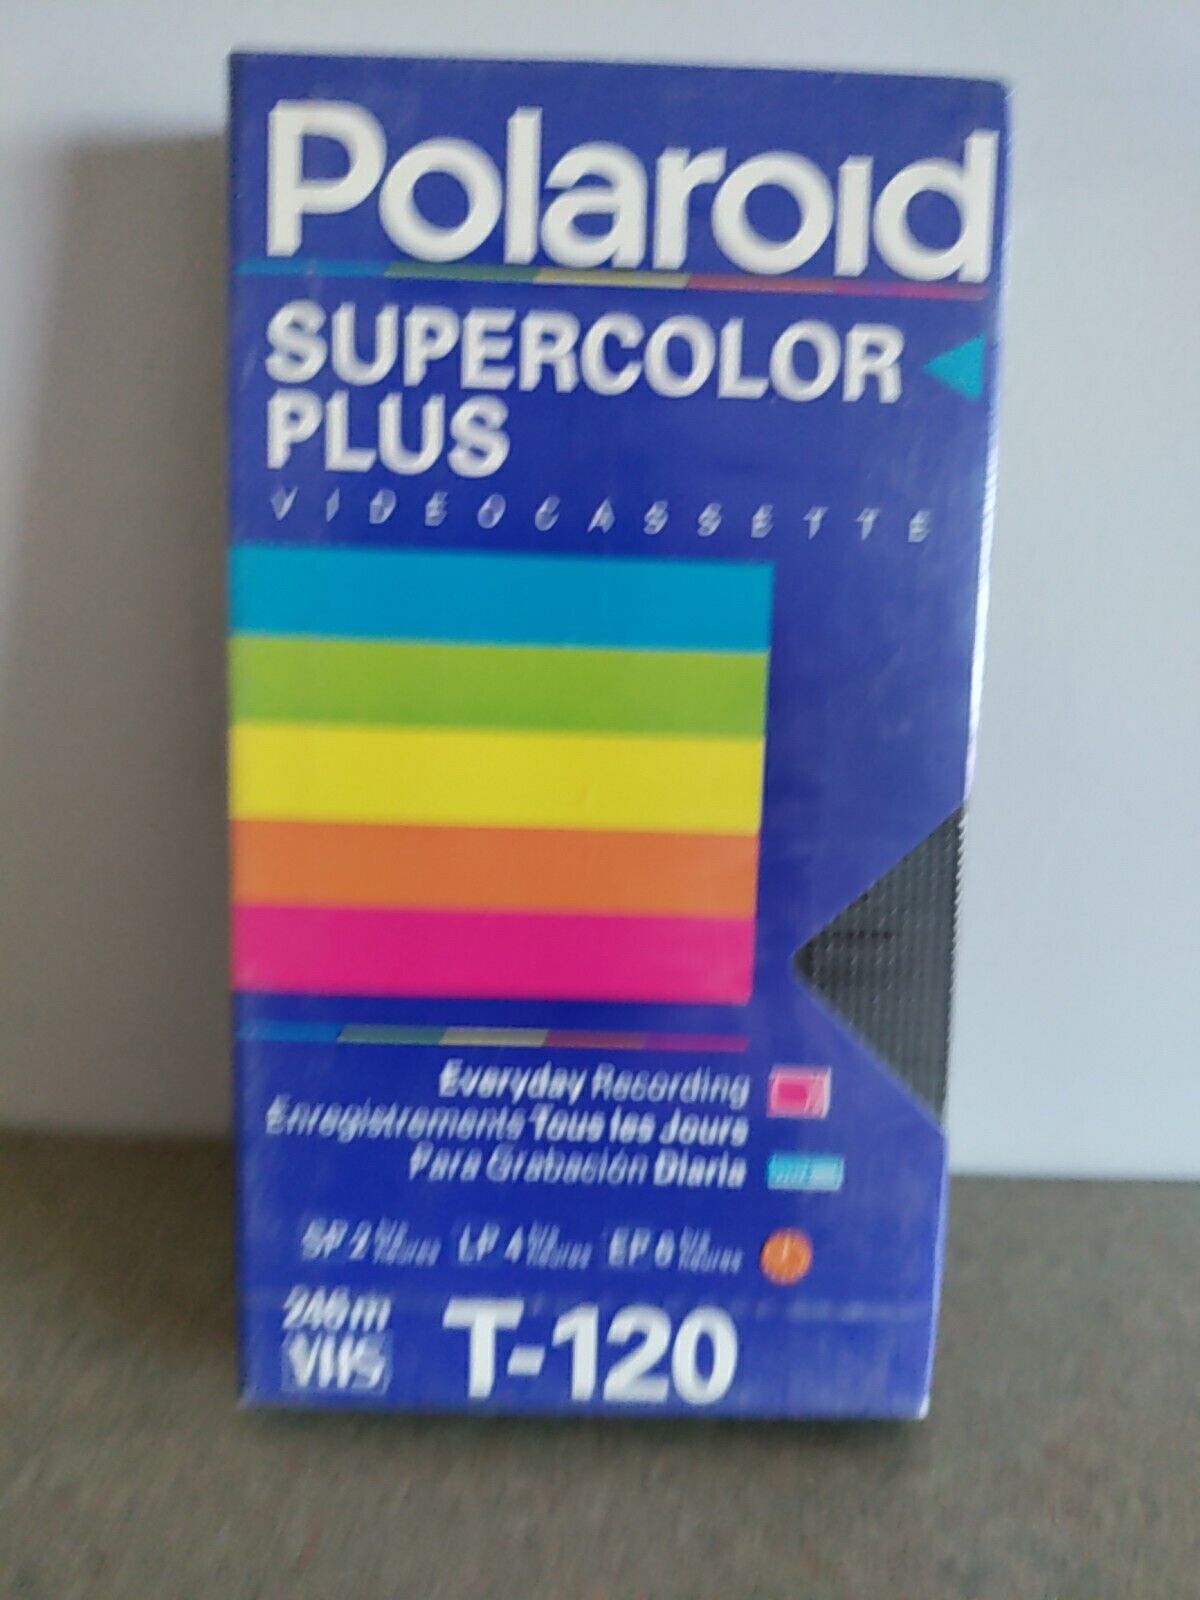 NEW SEALED Polaroid Supercolor Plus VHS Tapes T-120 Blank Video Cassette - image 1 of 1